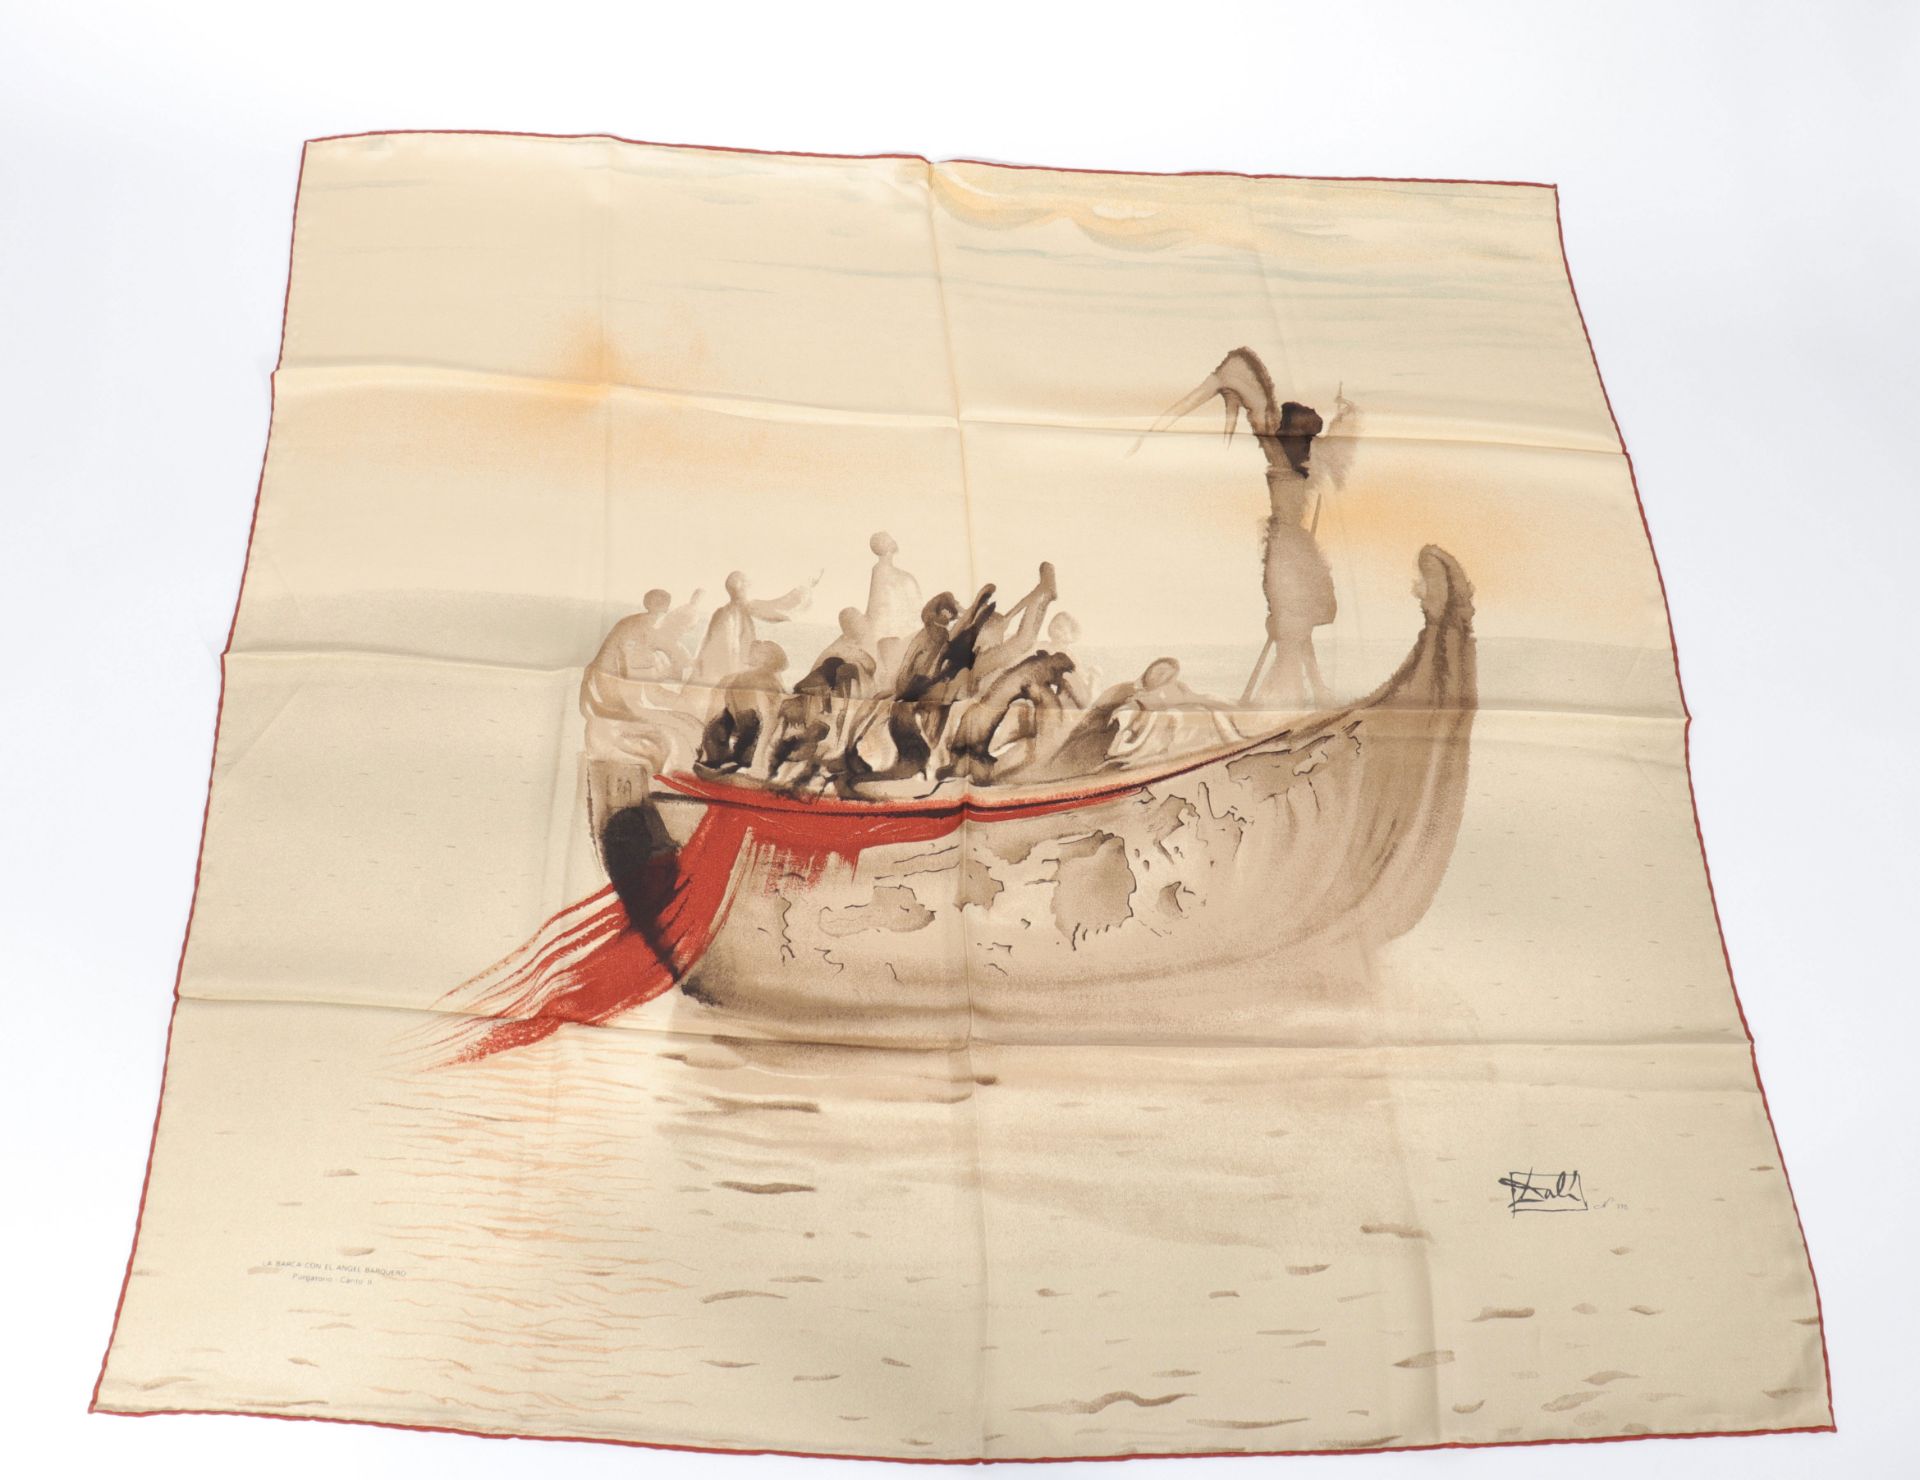 Salvador Dali. "The boat with the angel Boatman". Color printing on silk. Circa 70. Signed "Dali". - Image 2 of 2